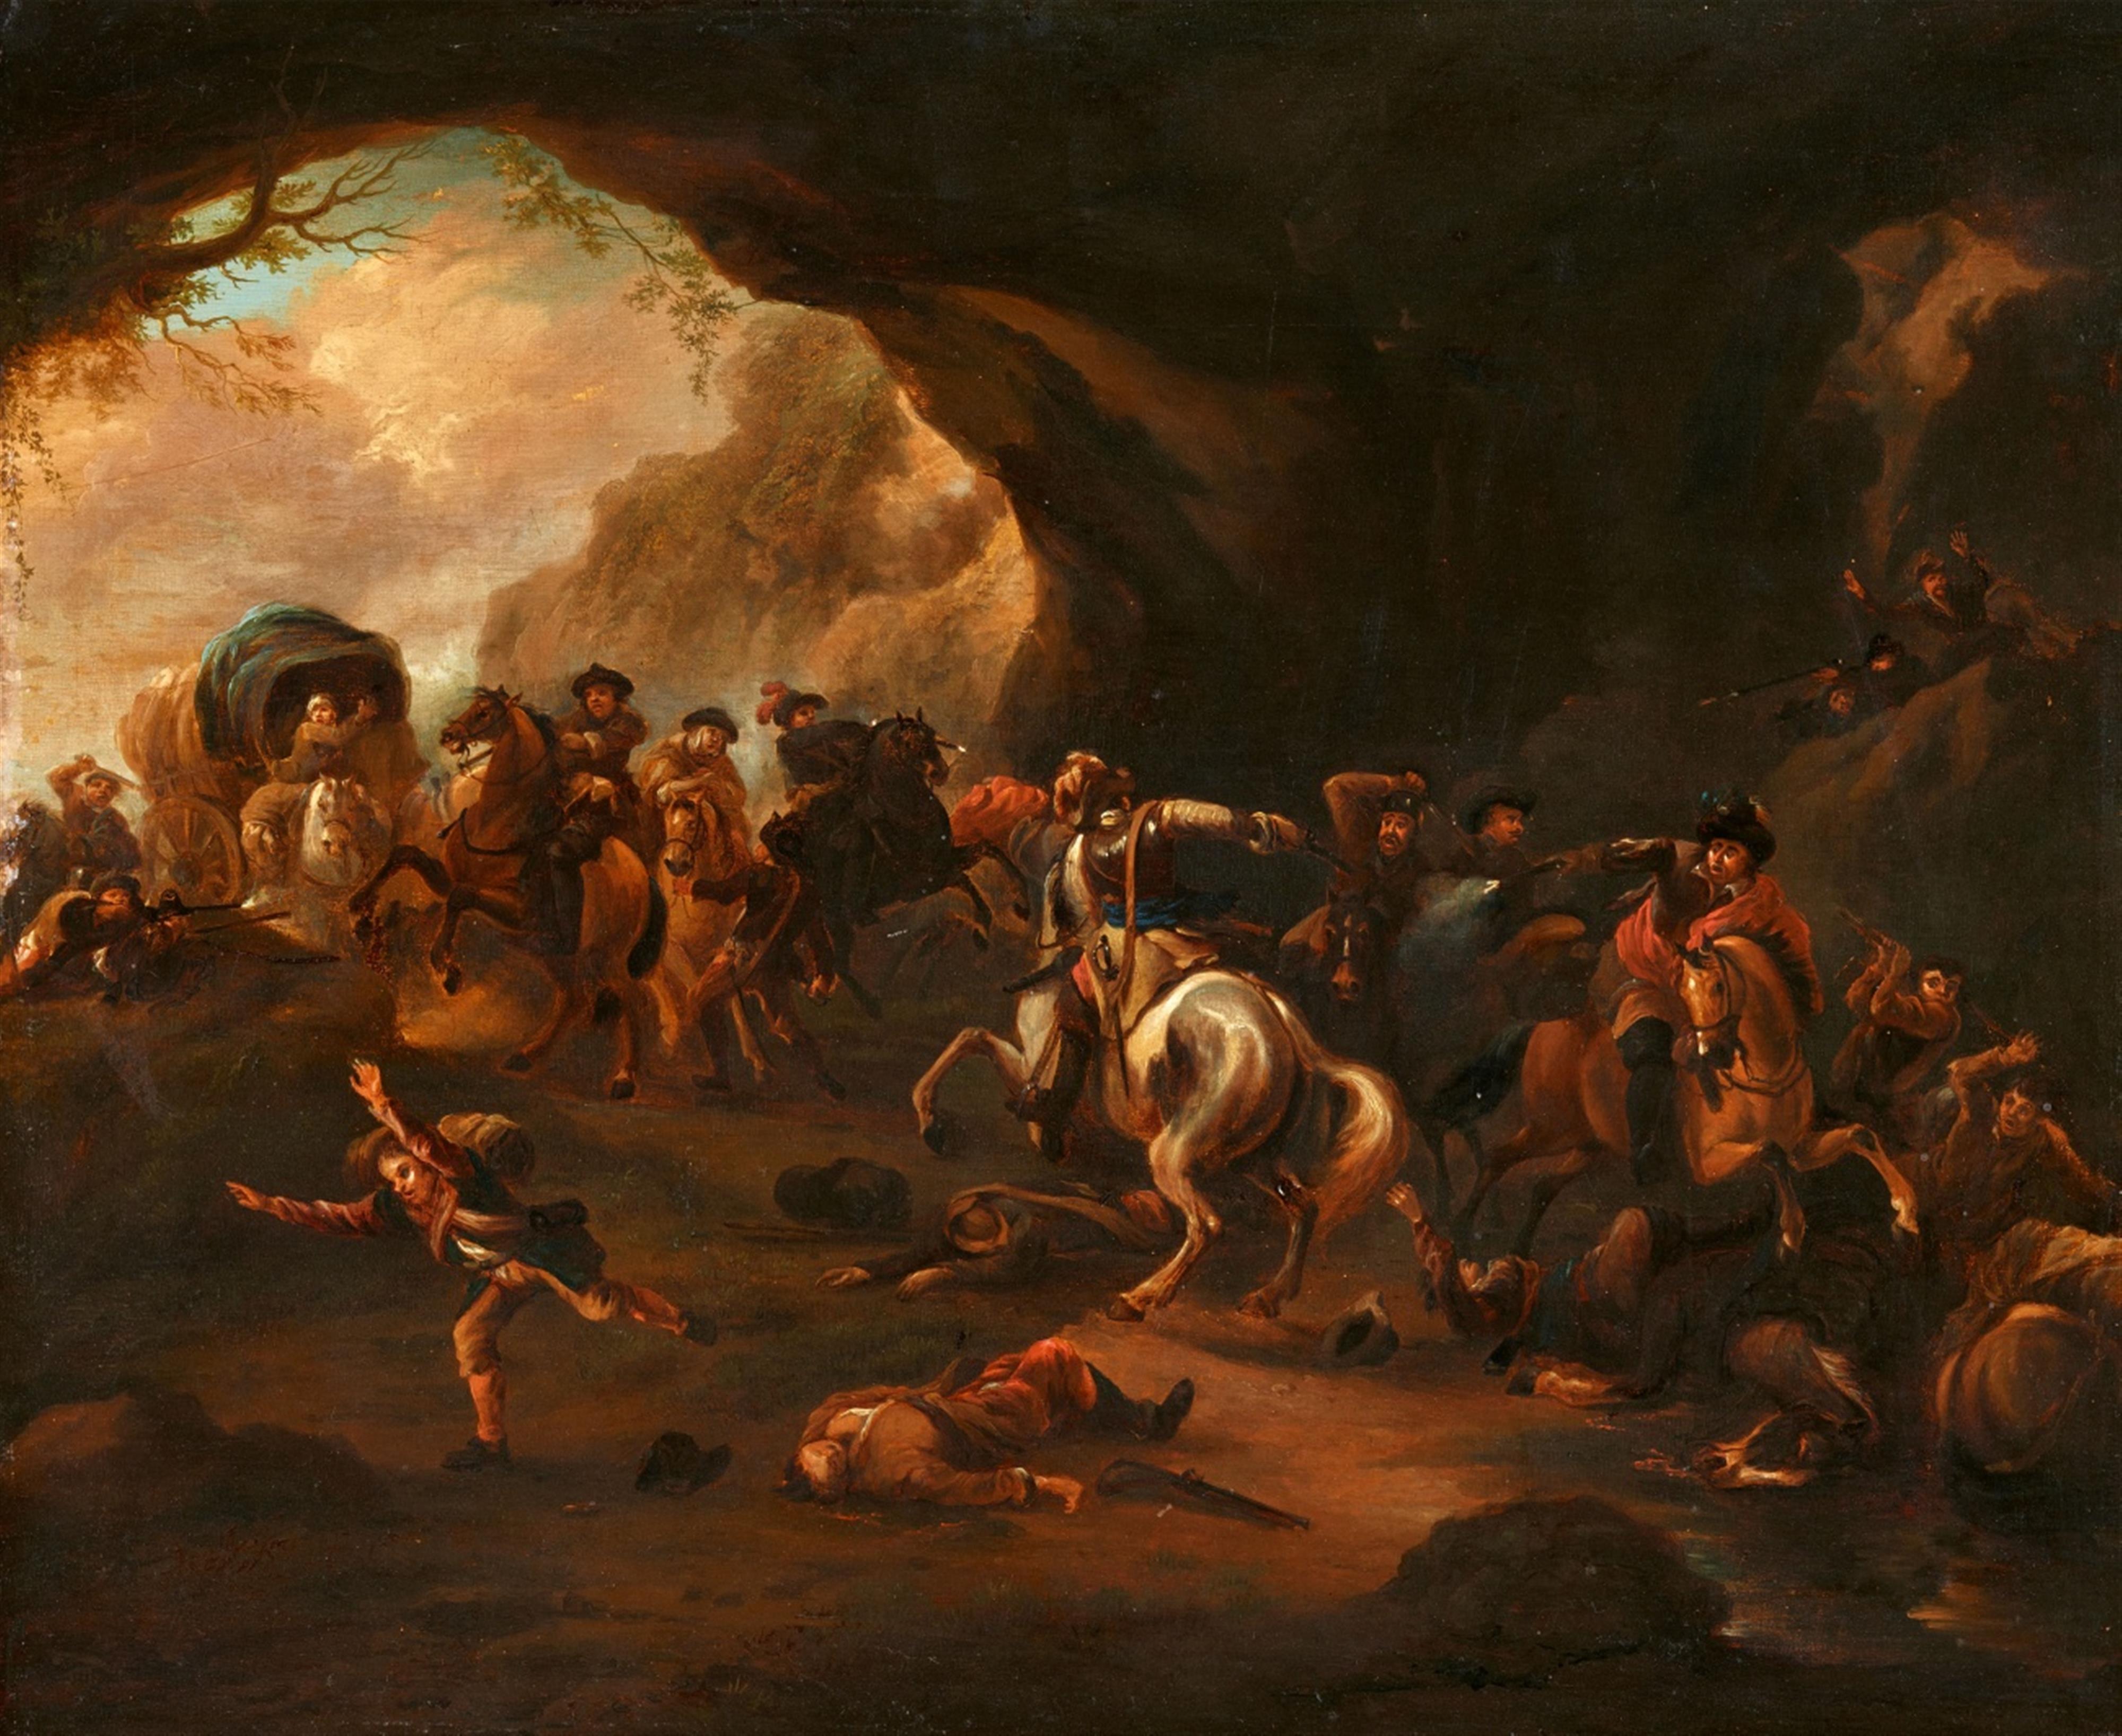 Dirck Stoop - Battle with Infantrymen and Cavalry in a Mountain Grotto - image-1